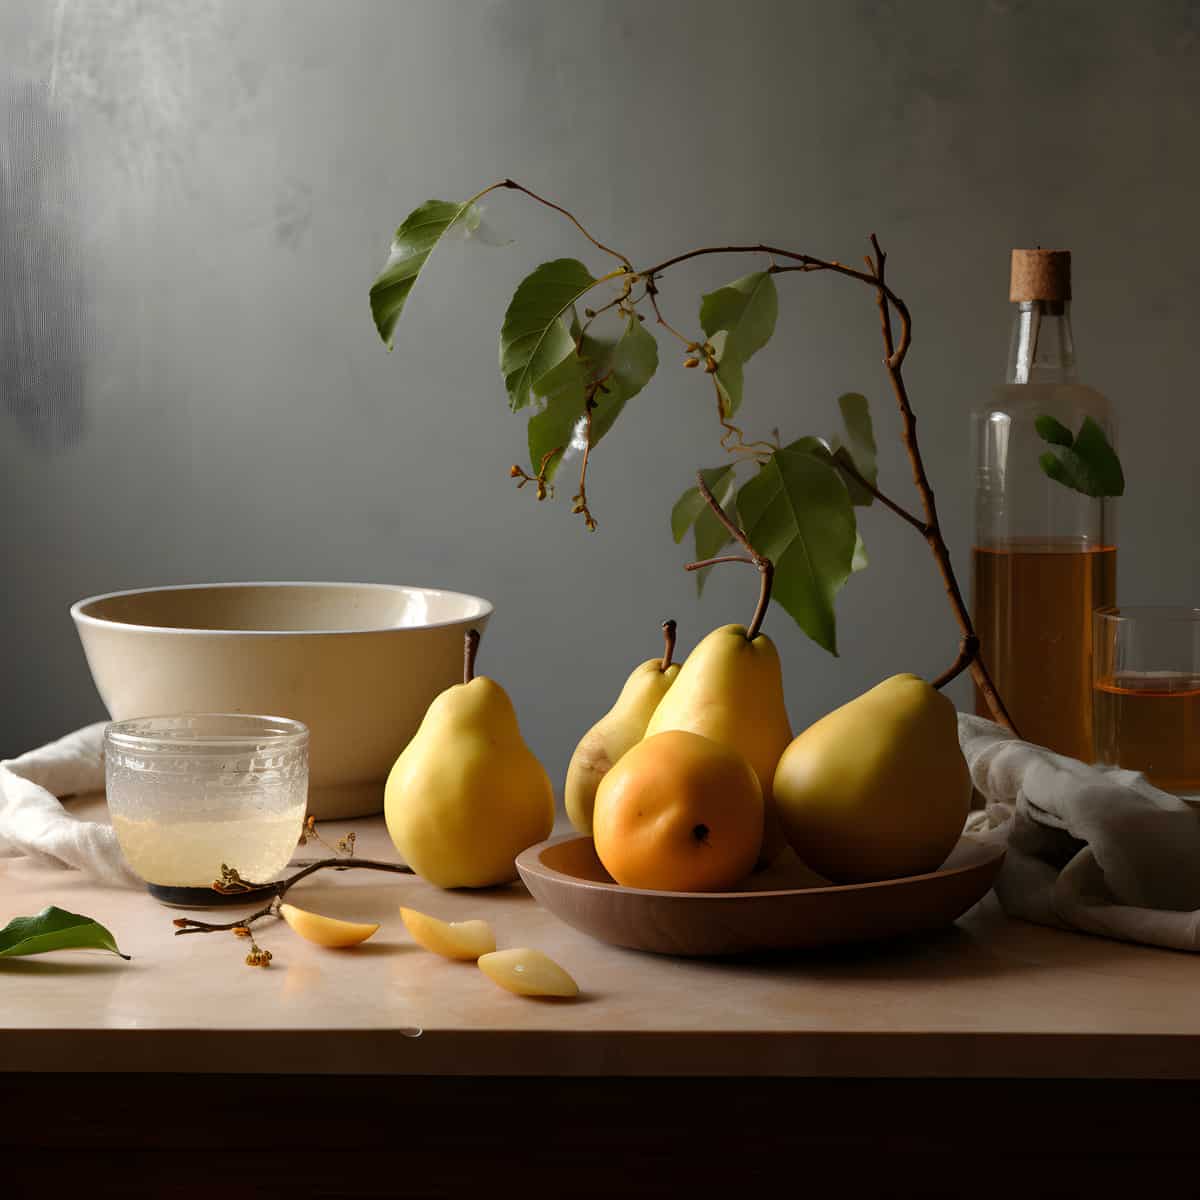 Asian Pears on a kitchen counter